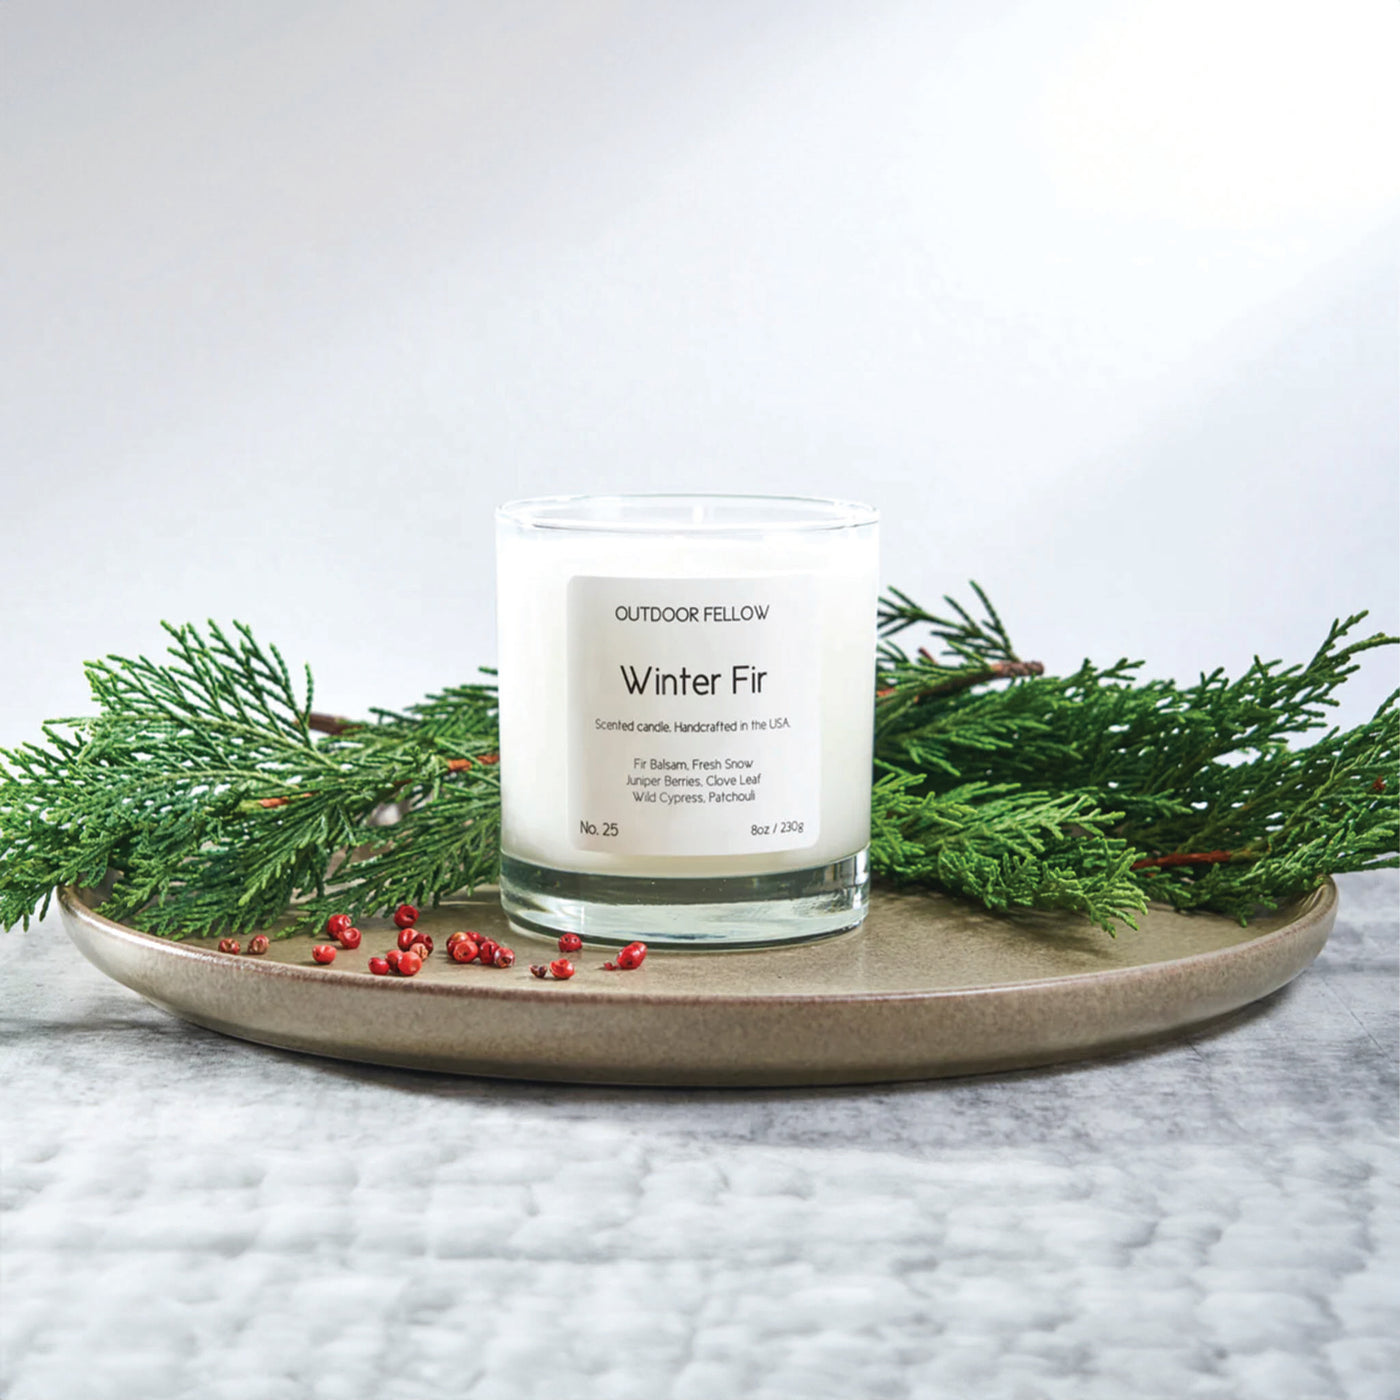 Outdoor Fellow | Winter Fir Scented Candle